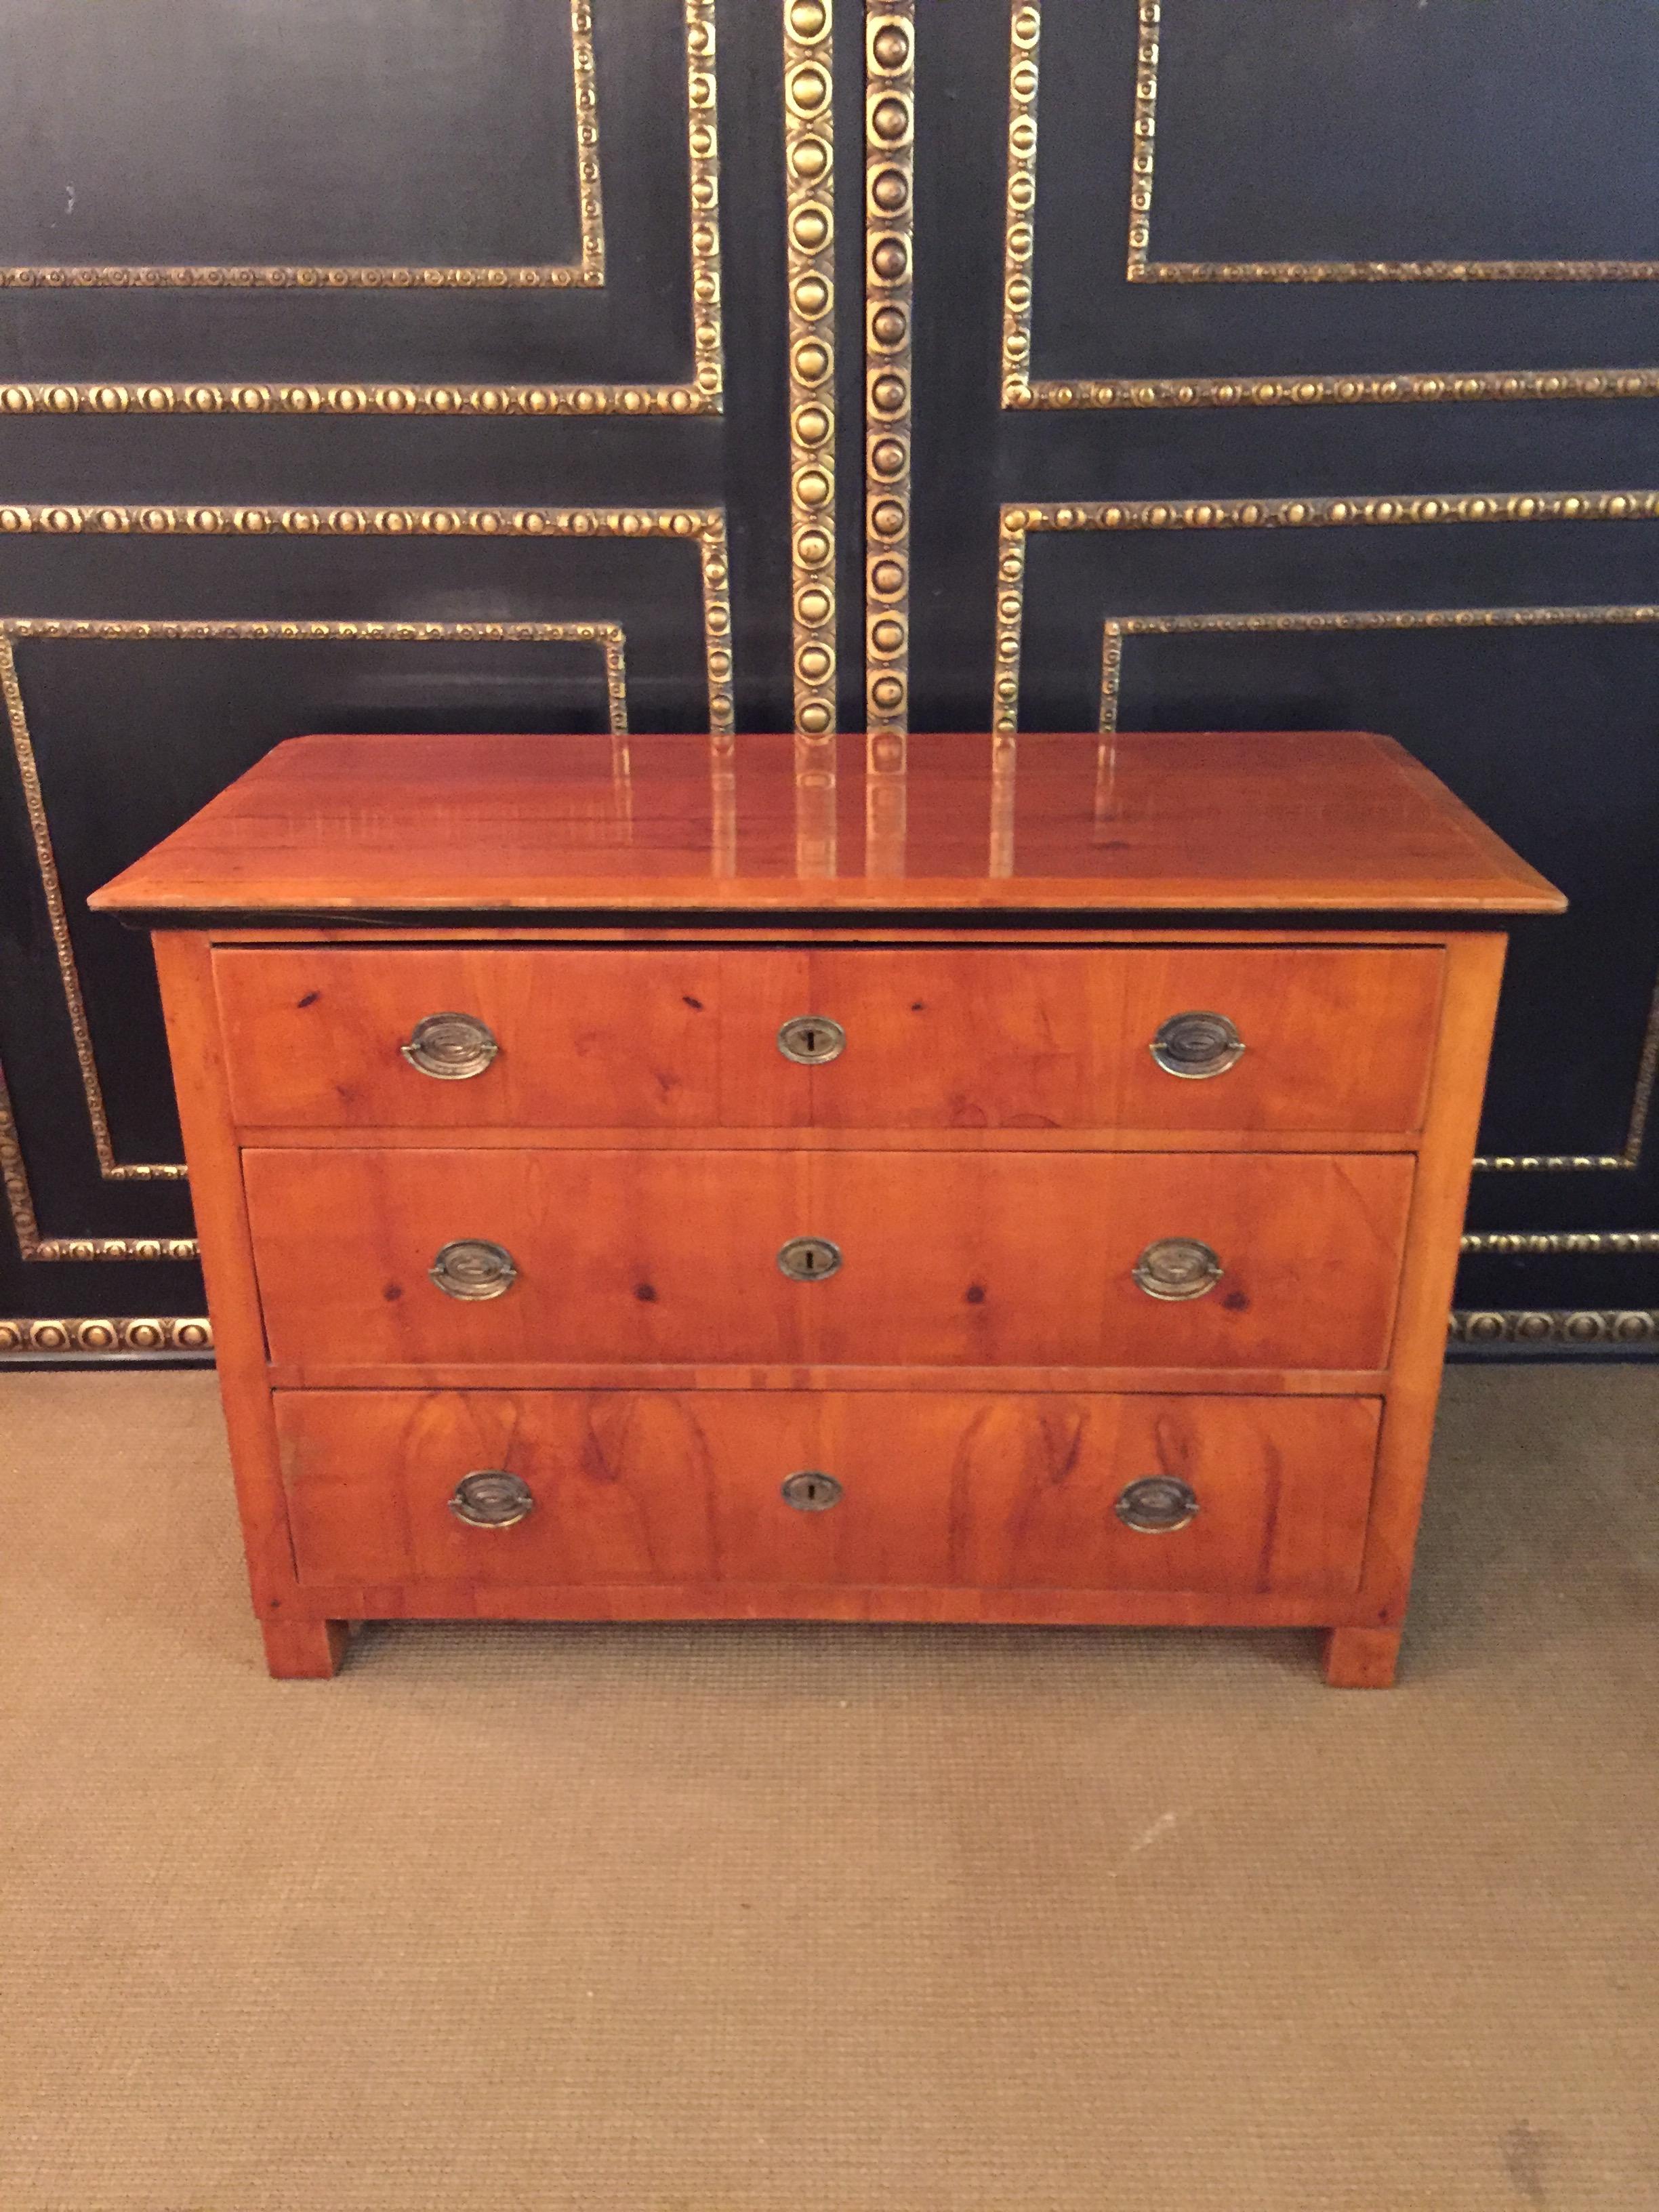 South German Biedermeier chest of drawers, circa 1820

Cherrywood tree drawers on solid softwood,
 Decorative original fittings and locks.



Excellent warm patina, grown over decades. Age-related signs of use.

Comes from a Berlin estate. For the